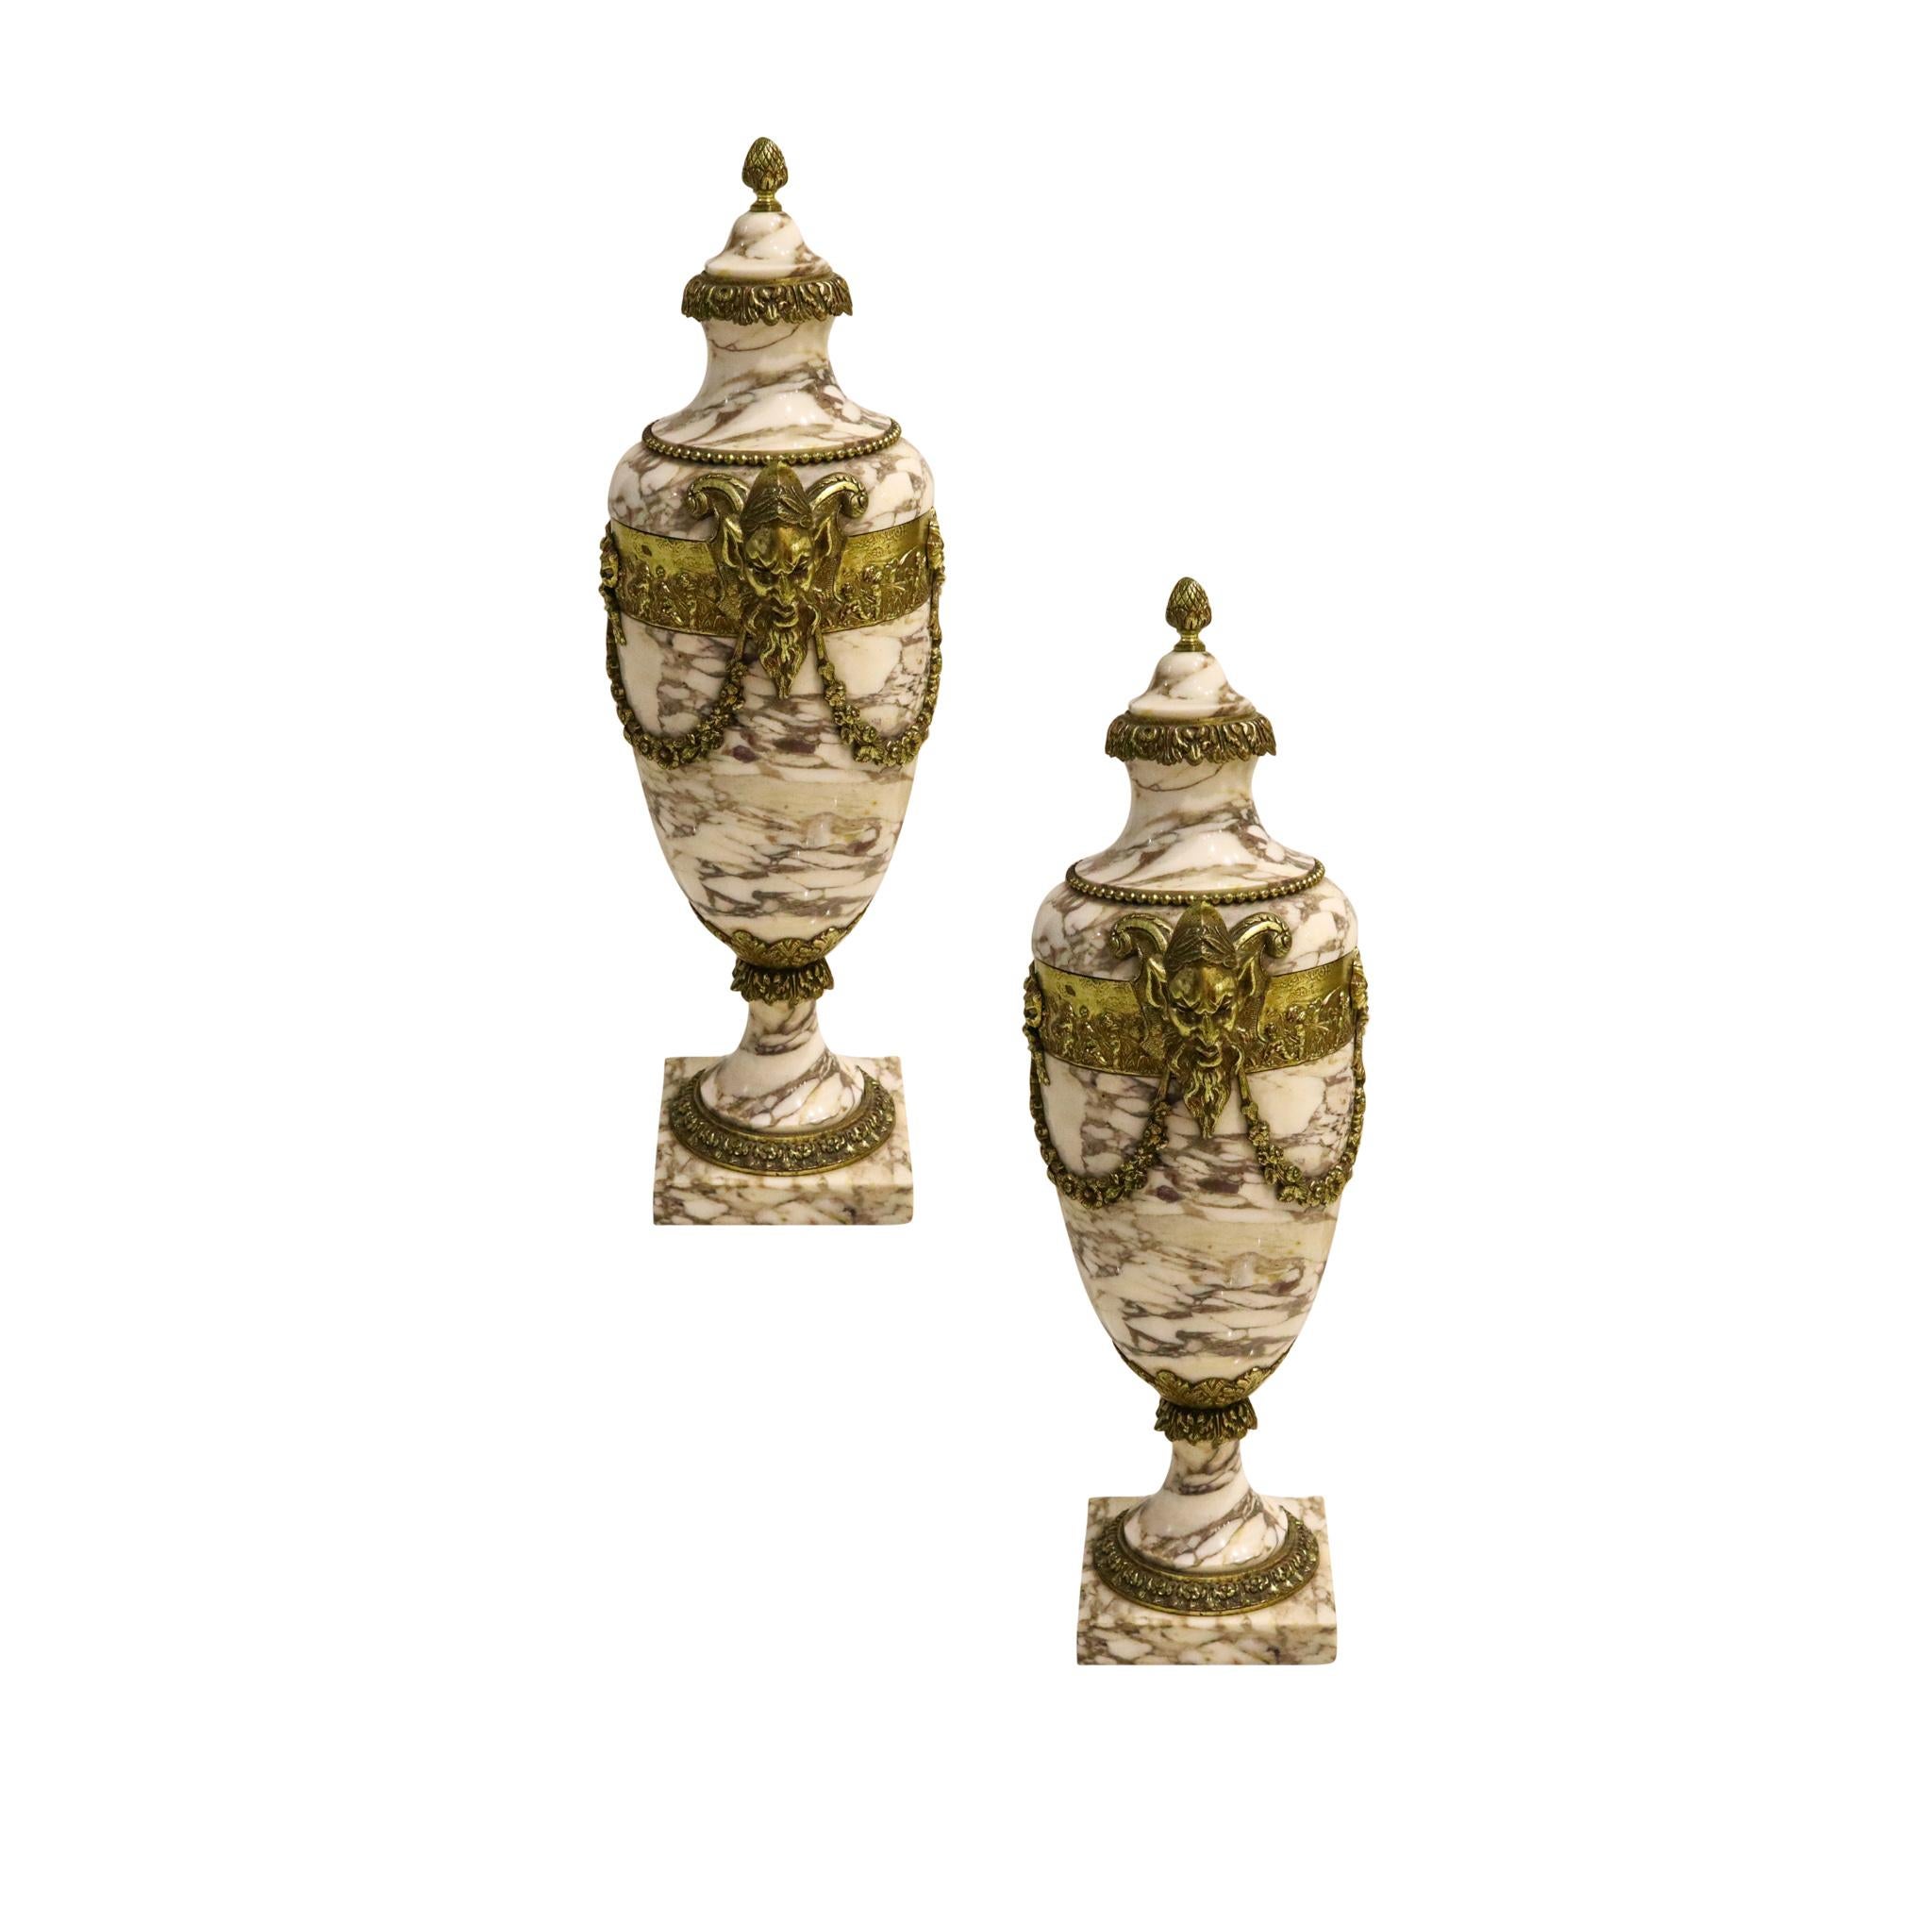 Pair of mythological Urns from the French third Empire period.

Fabulous decorative pieces, created in Paris, France during the period of the Third French Empire under Napoleon III (1852-1870), circa 1860s. They was carefully carved in solid